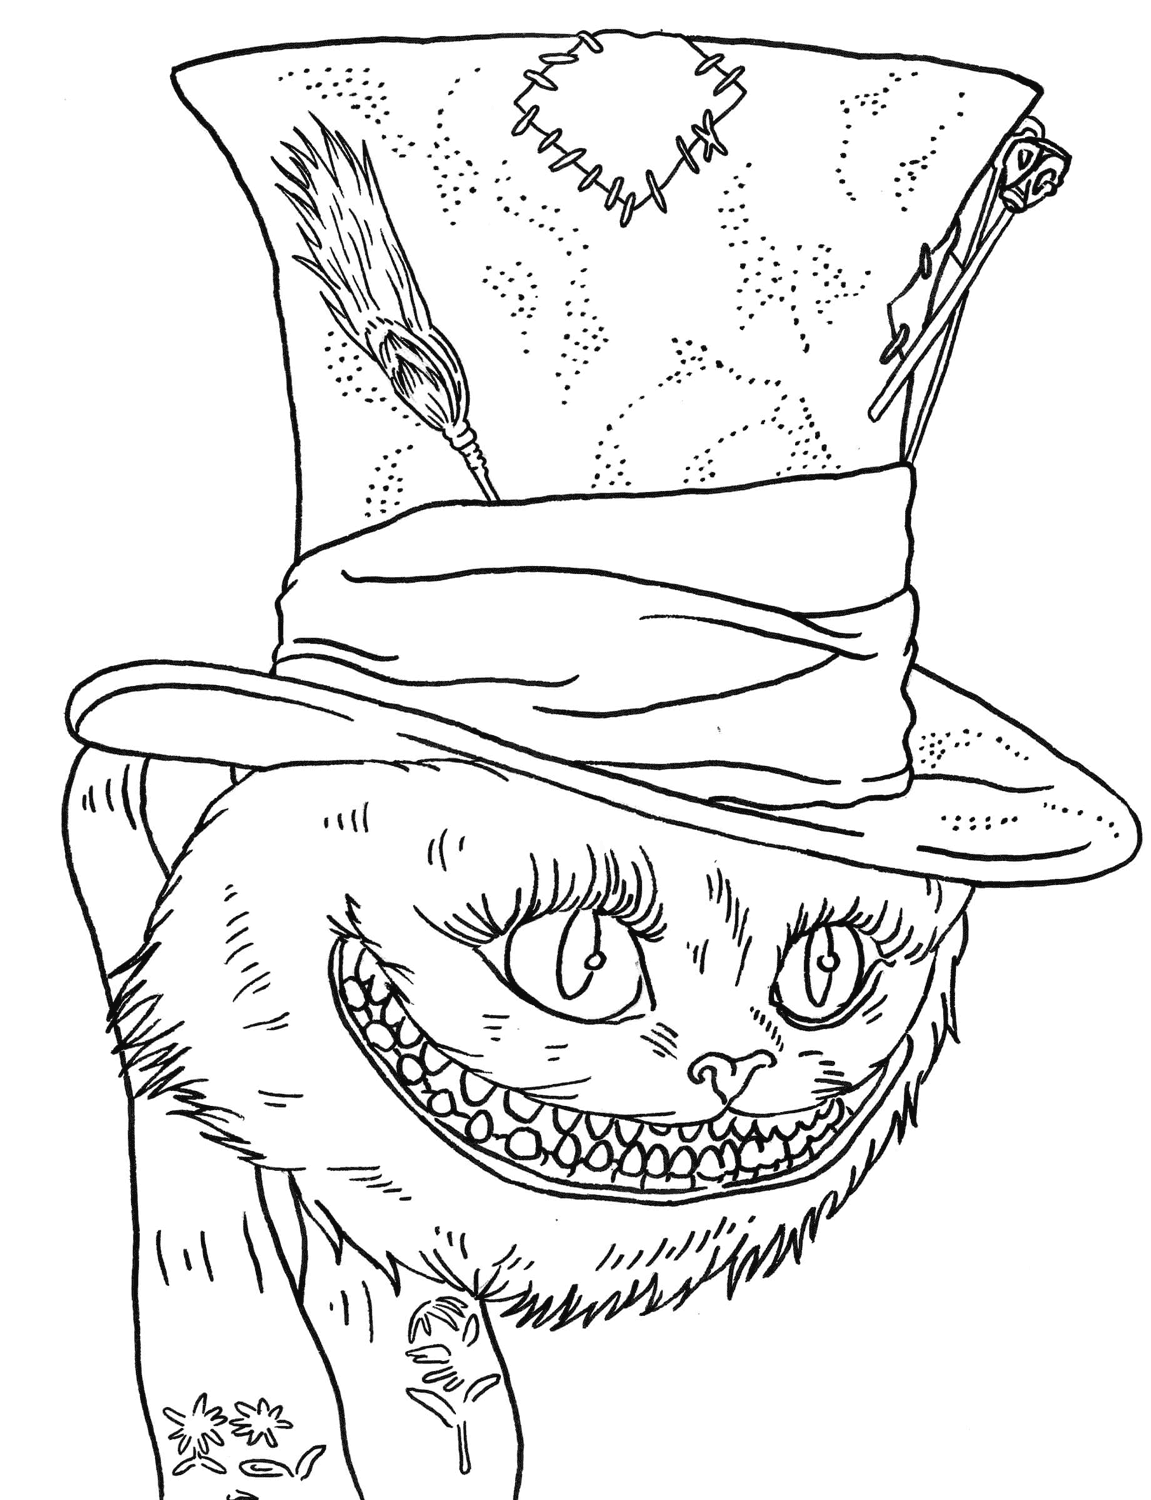 Cheshire Cat Coloring Pages to download and print for free